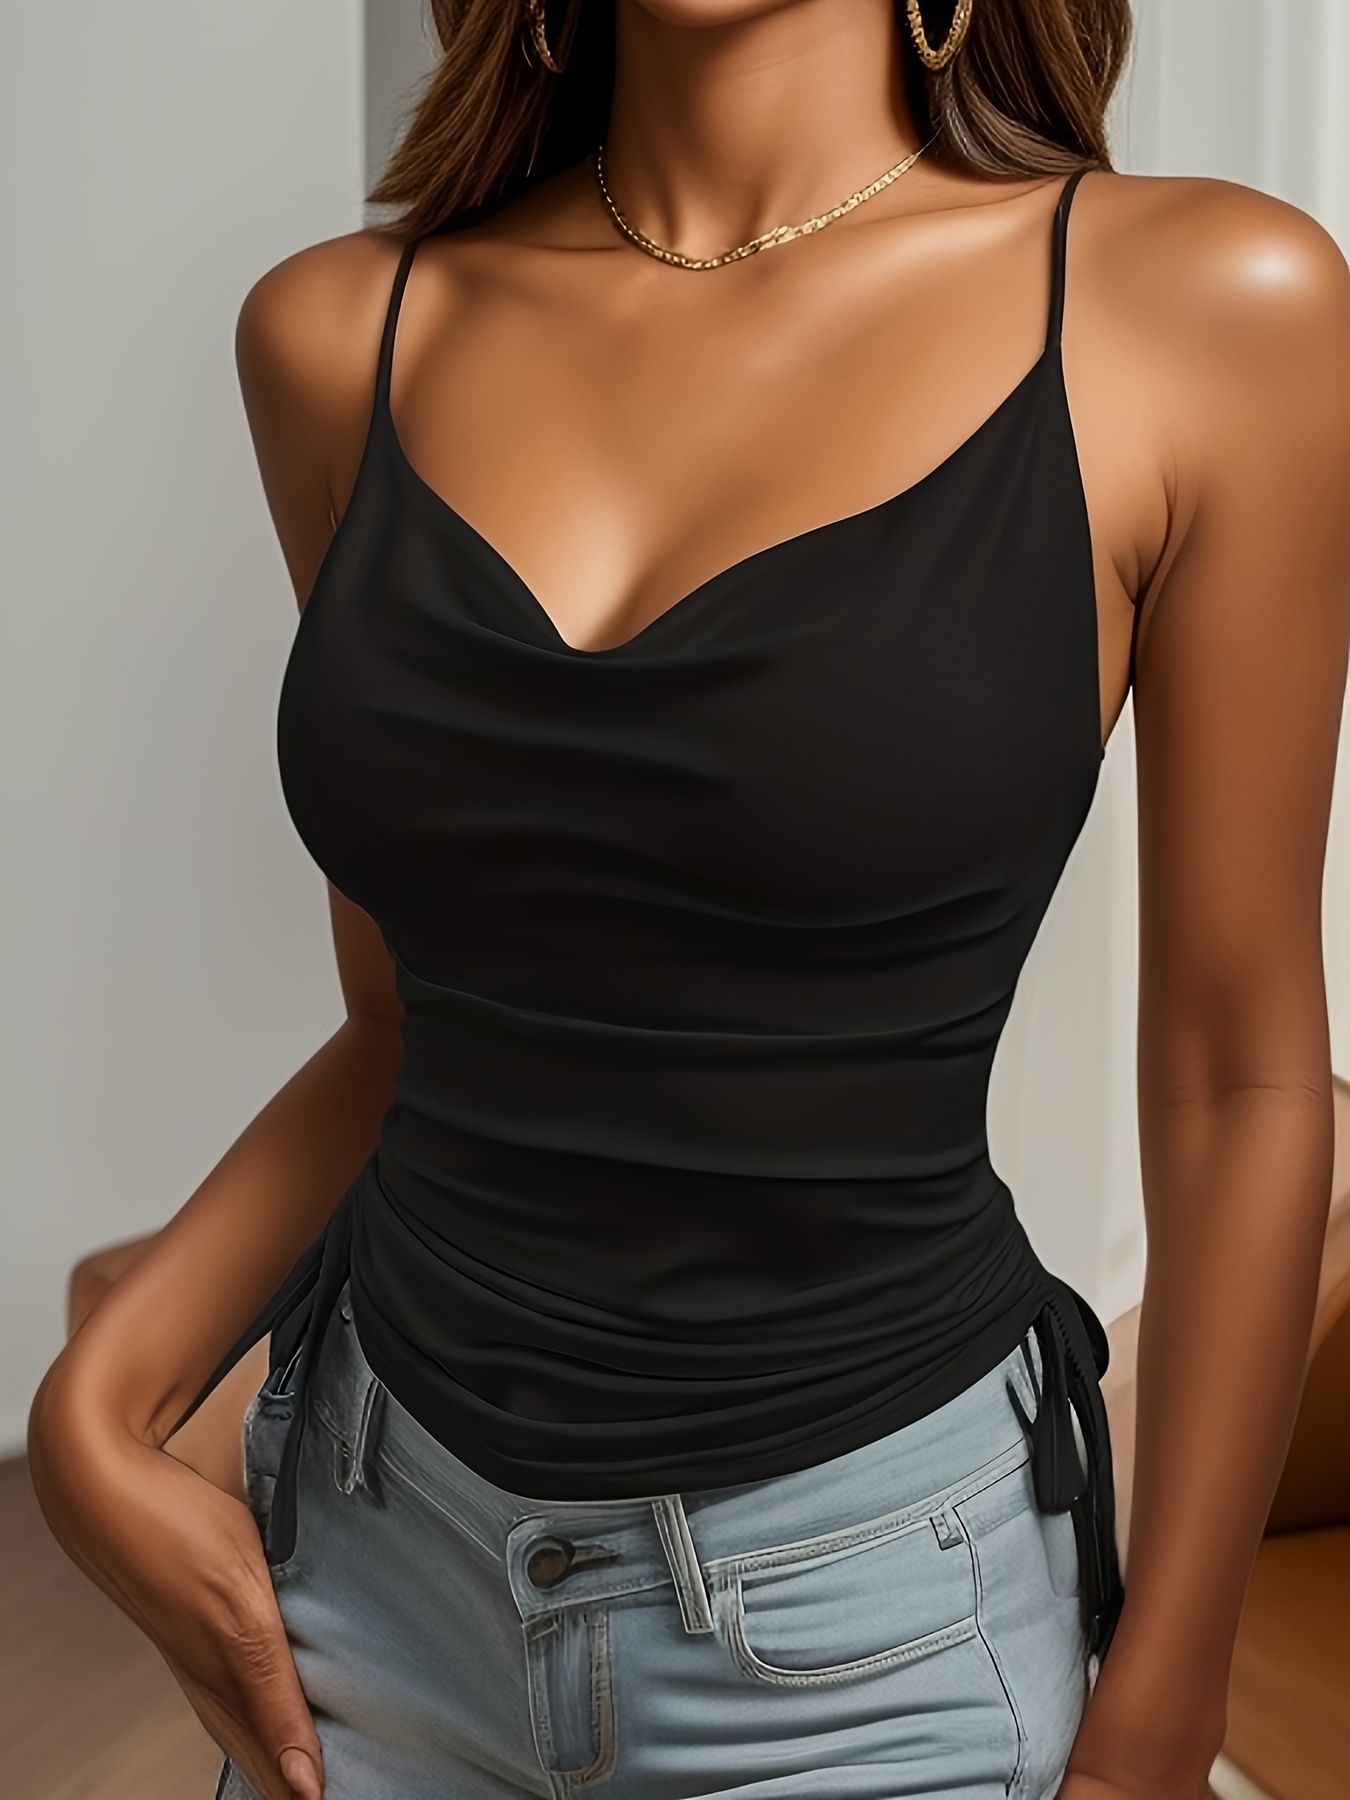 Satin Mesh V Neck Tank Top Women Cami Top Silk Camisole Casual Blouse（large）